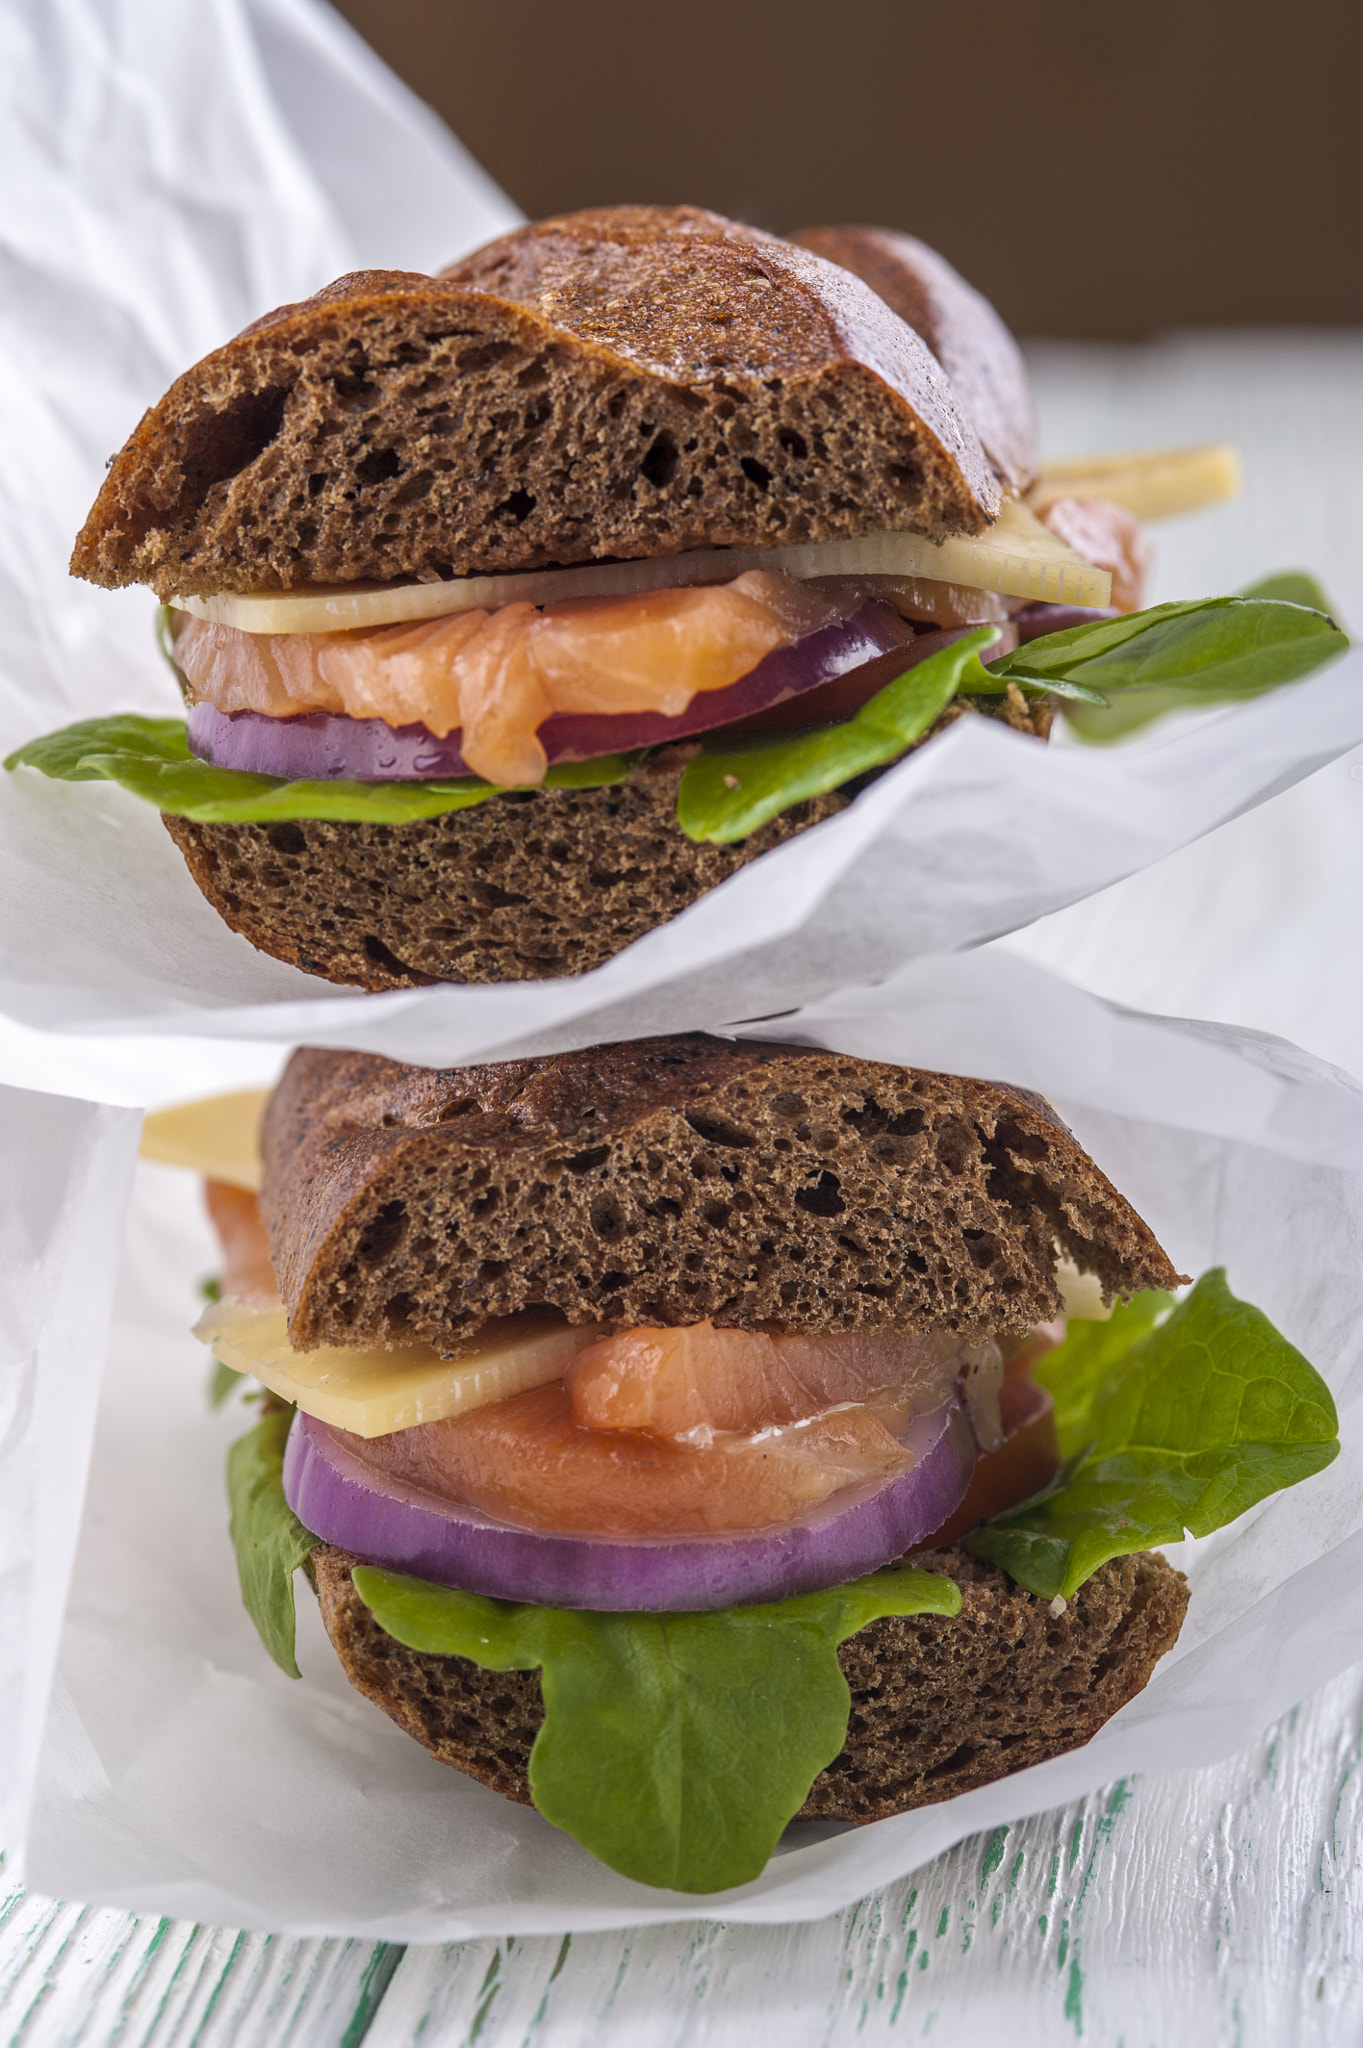 Nikon D700 + AF Micro-Nikkor 105mm f/2.8 sample photo. Two rye bread sandwiches with salmon, vegetables and lettuce photography